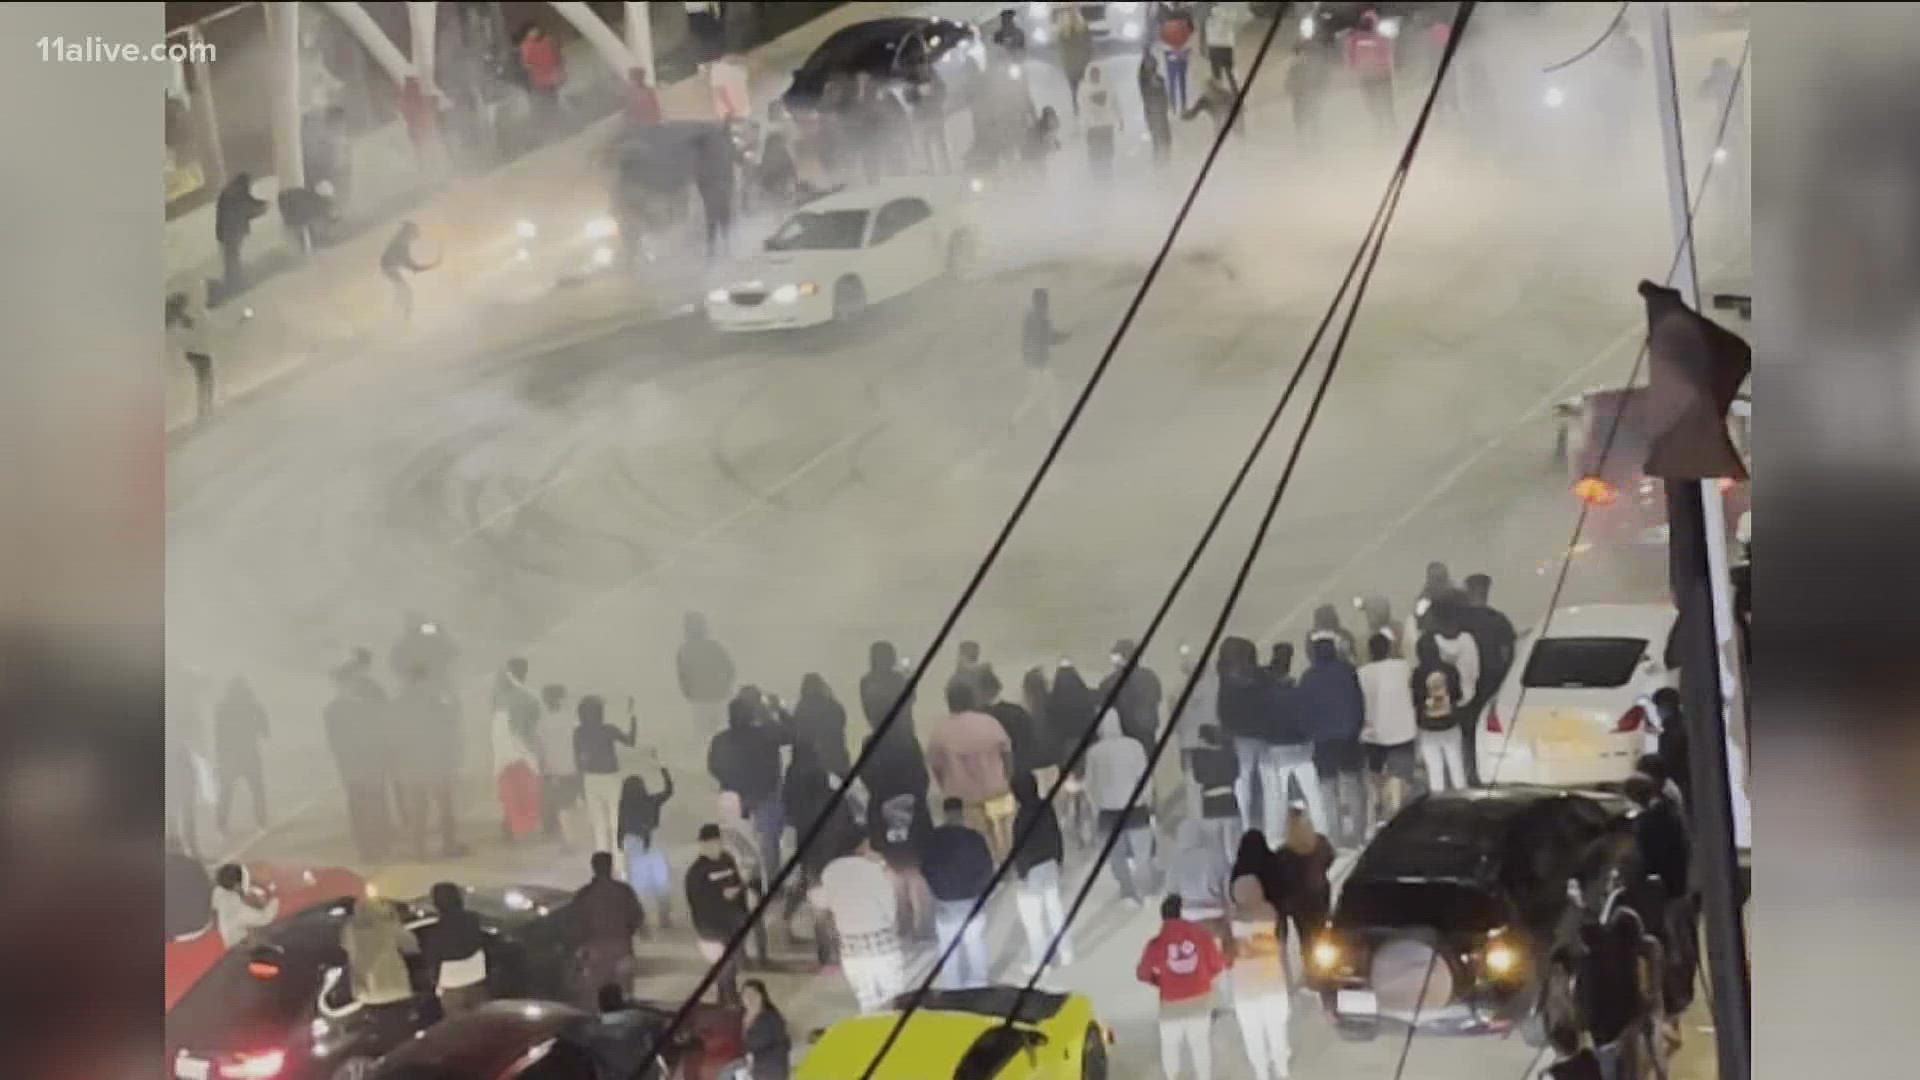 The ongoing battle with street racing hit the Peachtree Street Bridge early Sunday morning.